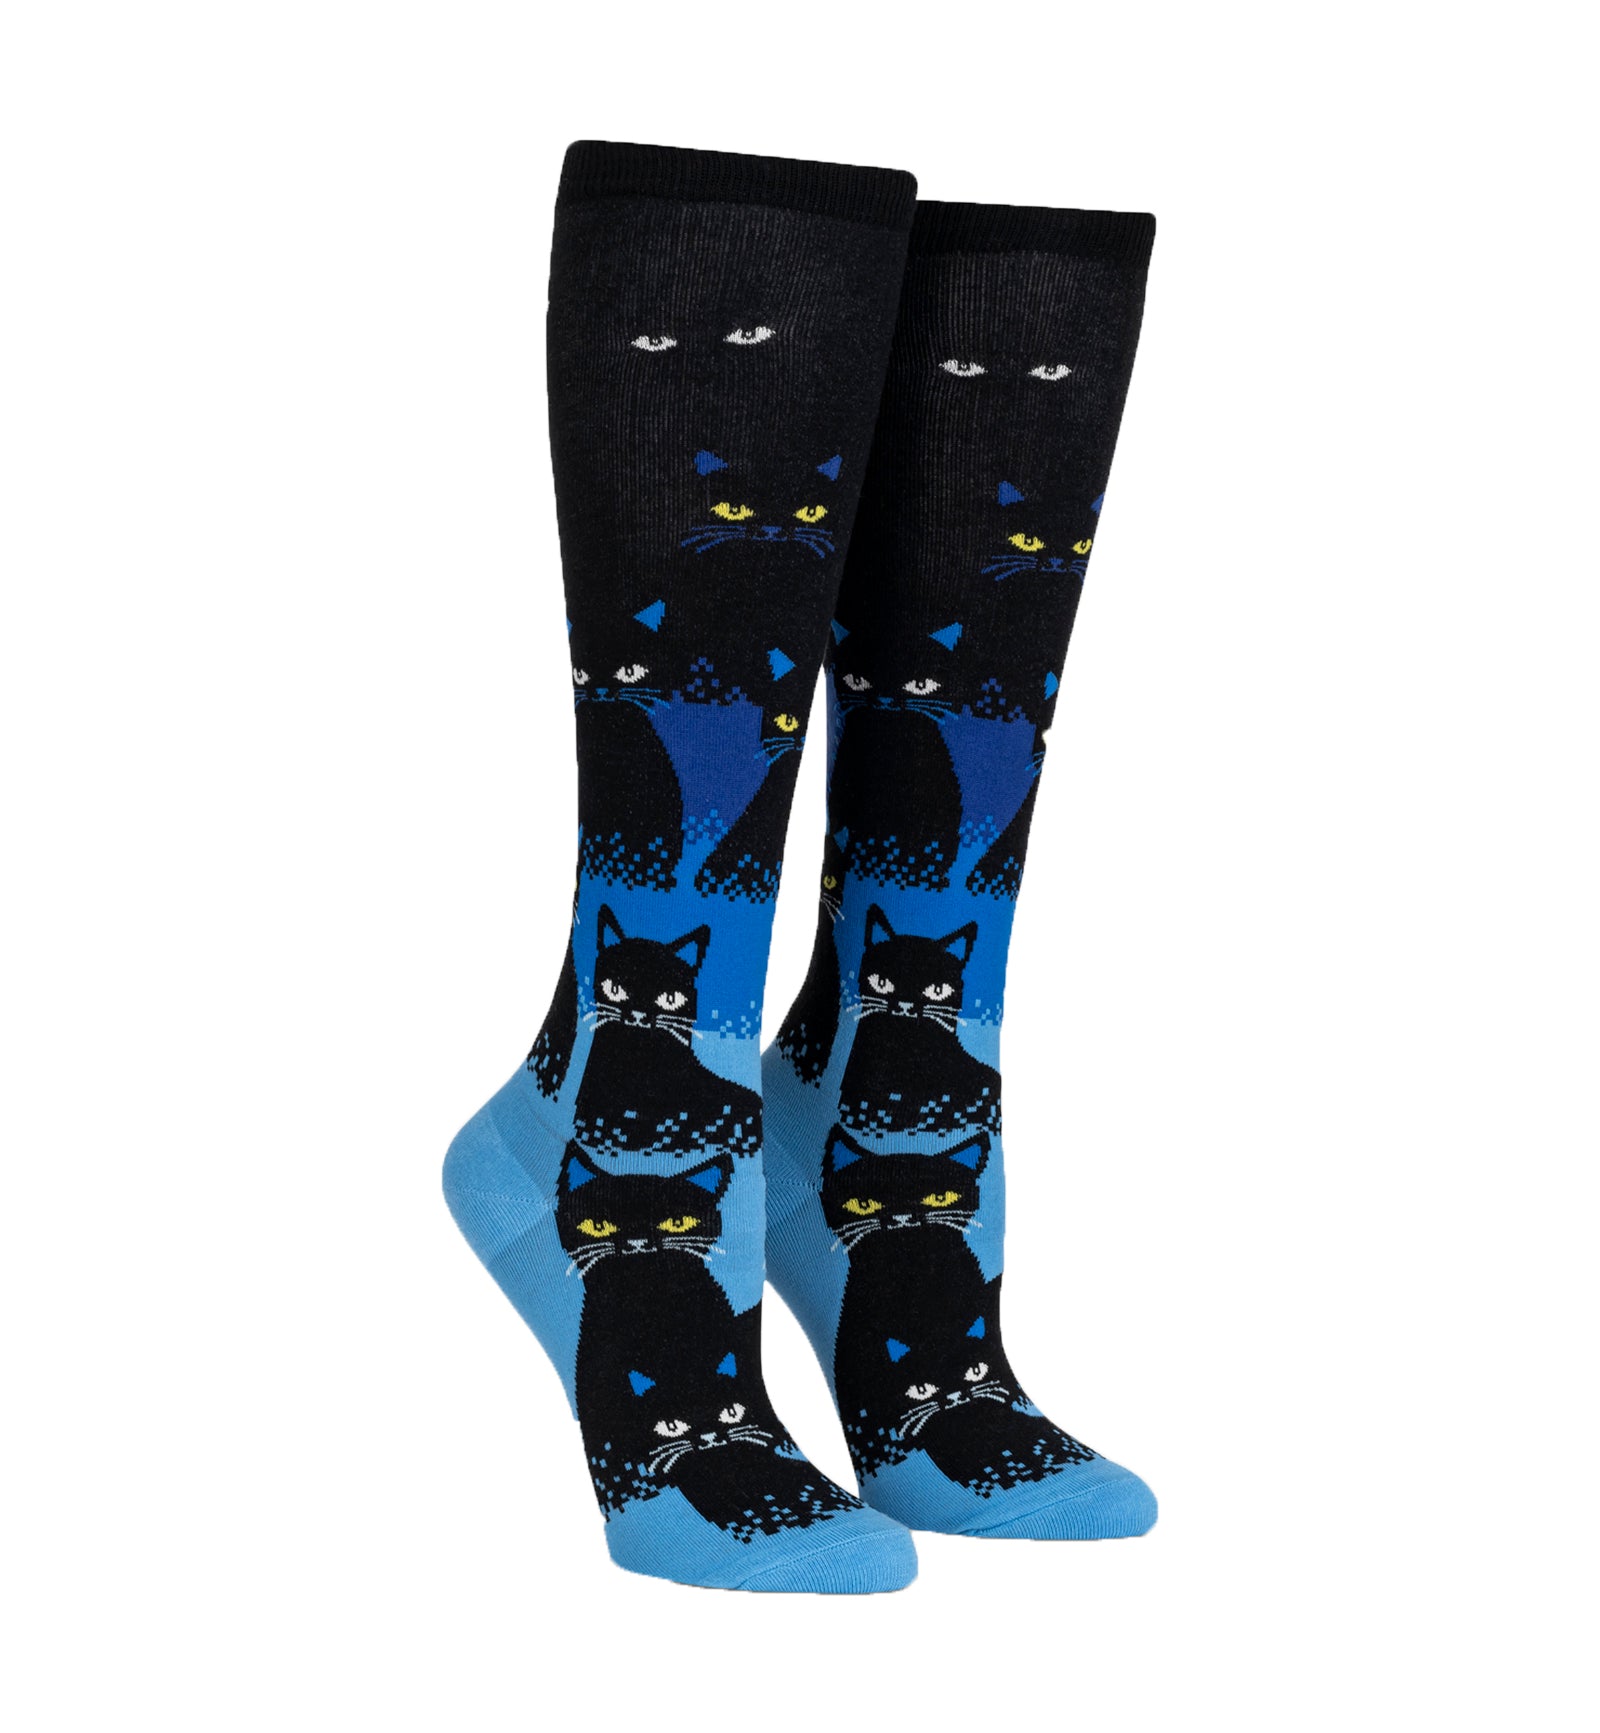 SOCK it to me Unisex Knee High Socks (F0643),Cats in the Dark - Cats in the Dark,One Size